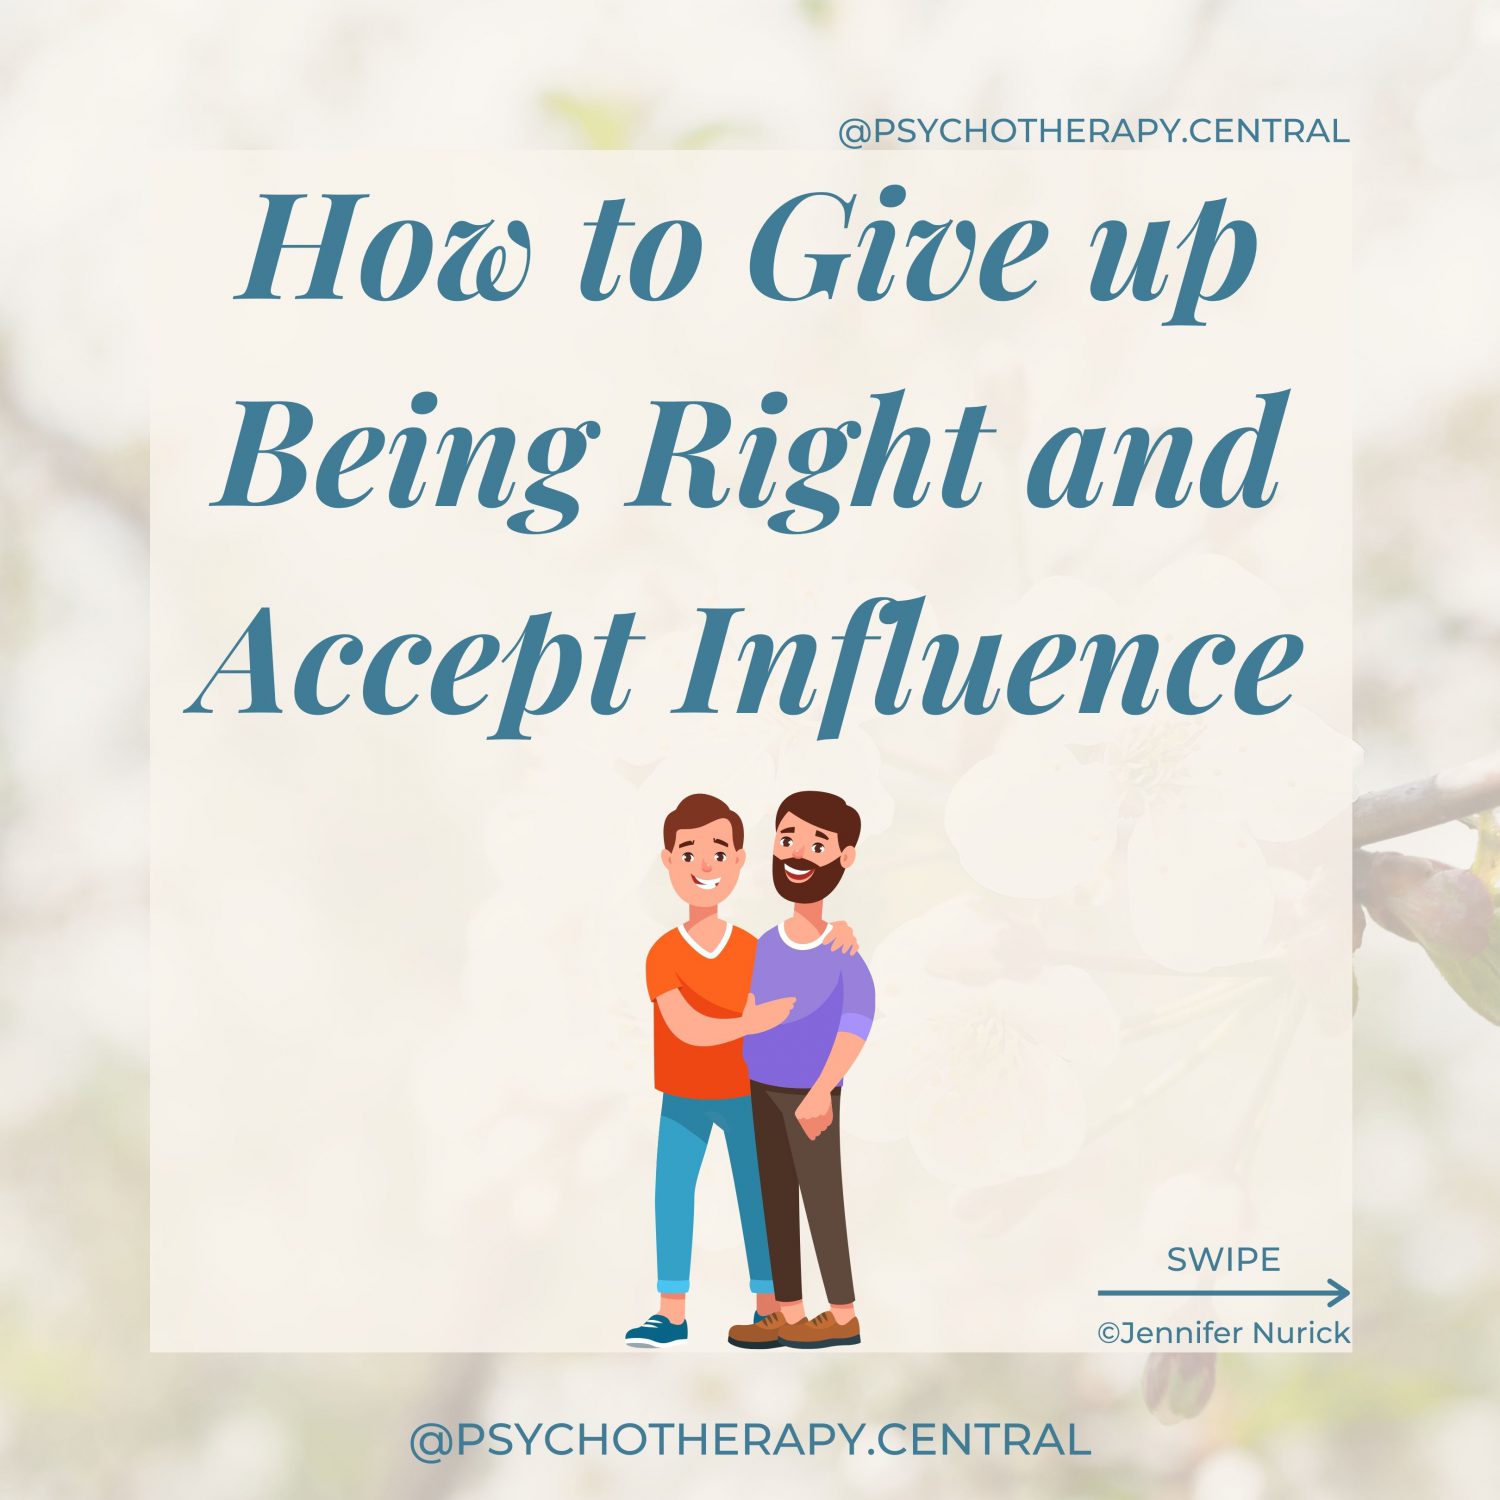 How to Give up Being Right and Accept Influence 1 – Listen to your partner without thinking about how you will defend your position. 2 – Try to find something in their point of view that is reasonable, a “kernel of truth”. You don’t have to agree with everything. 3 – Get creative and try to think of a solution that suits you both and makes space for this “kernel of truth”. 4 – Be willing to compromise; it will make your partner feel heard.